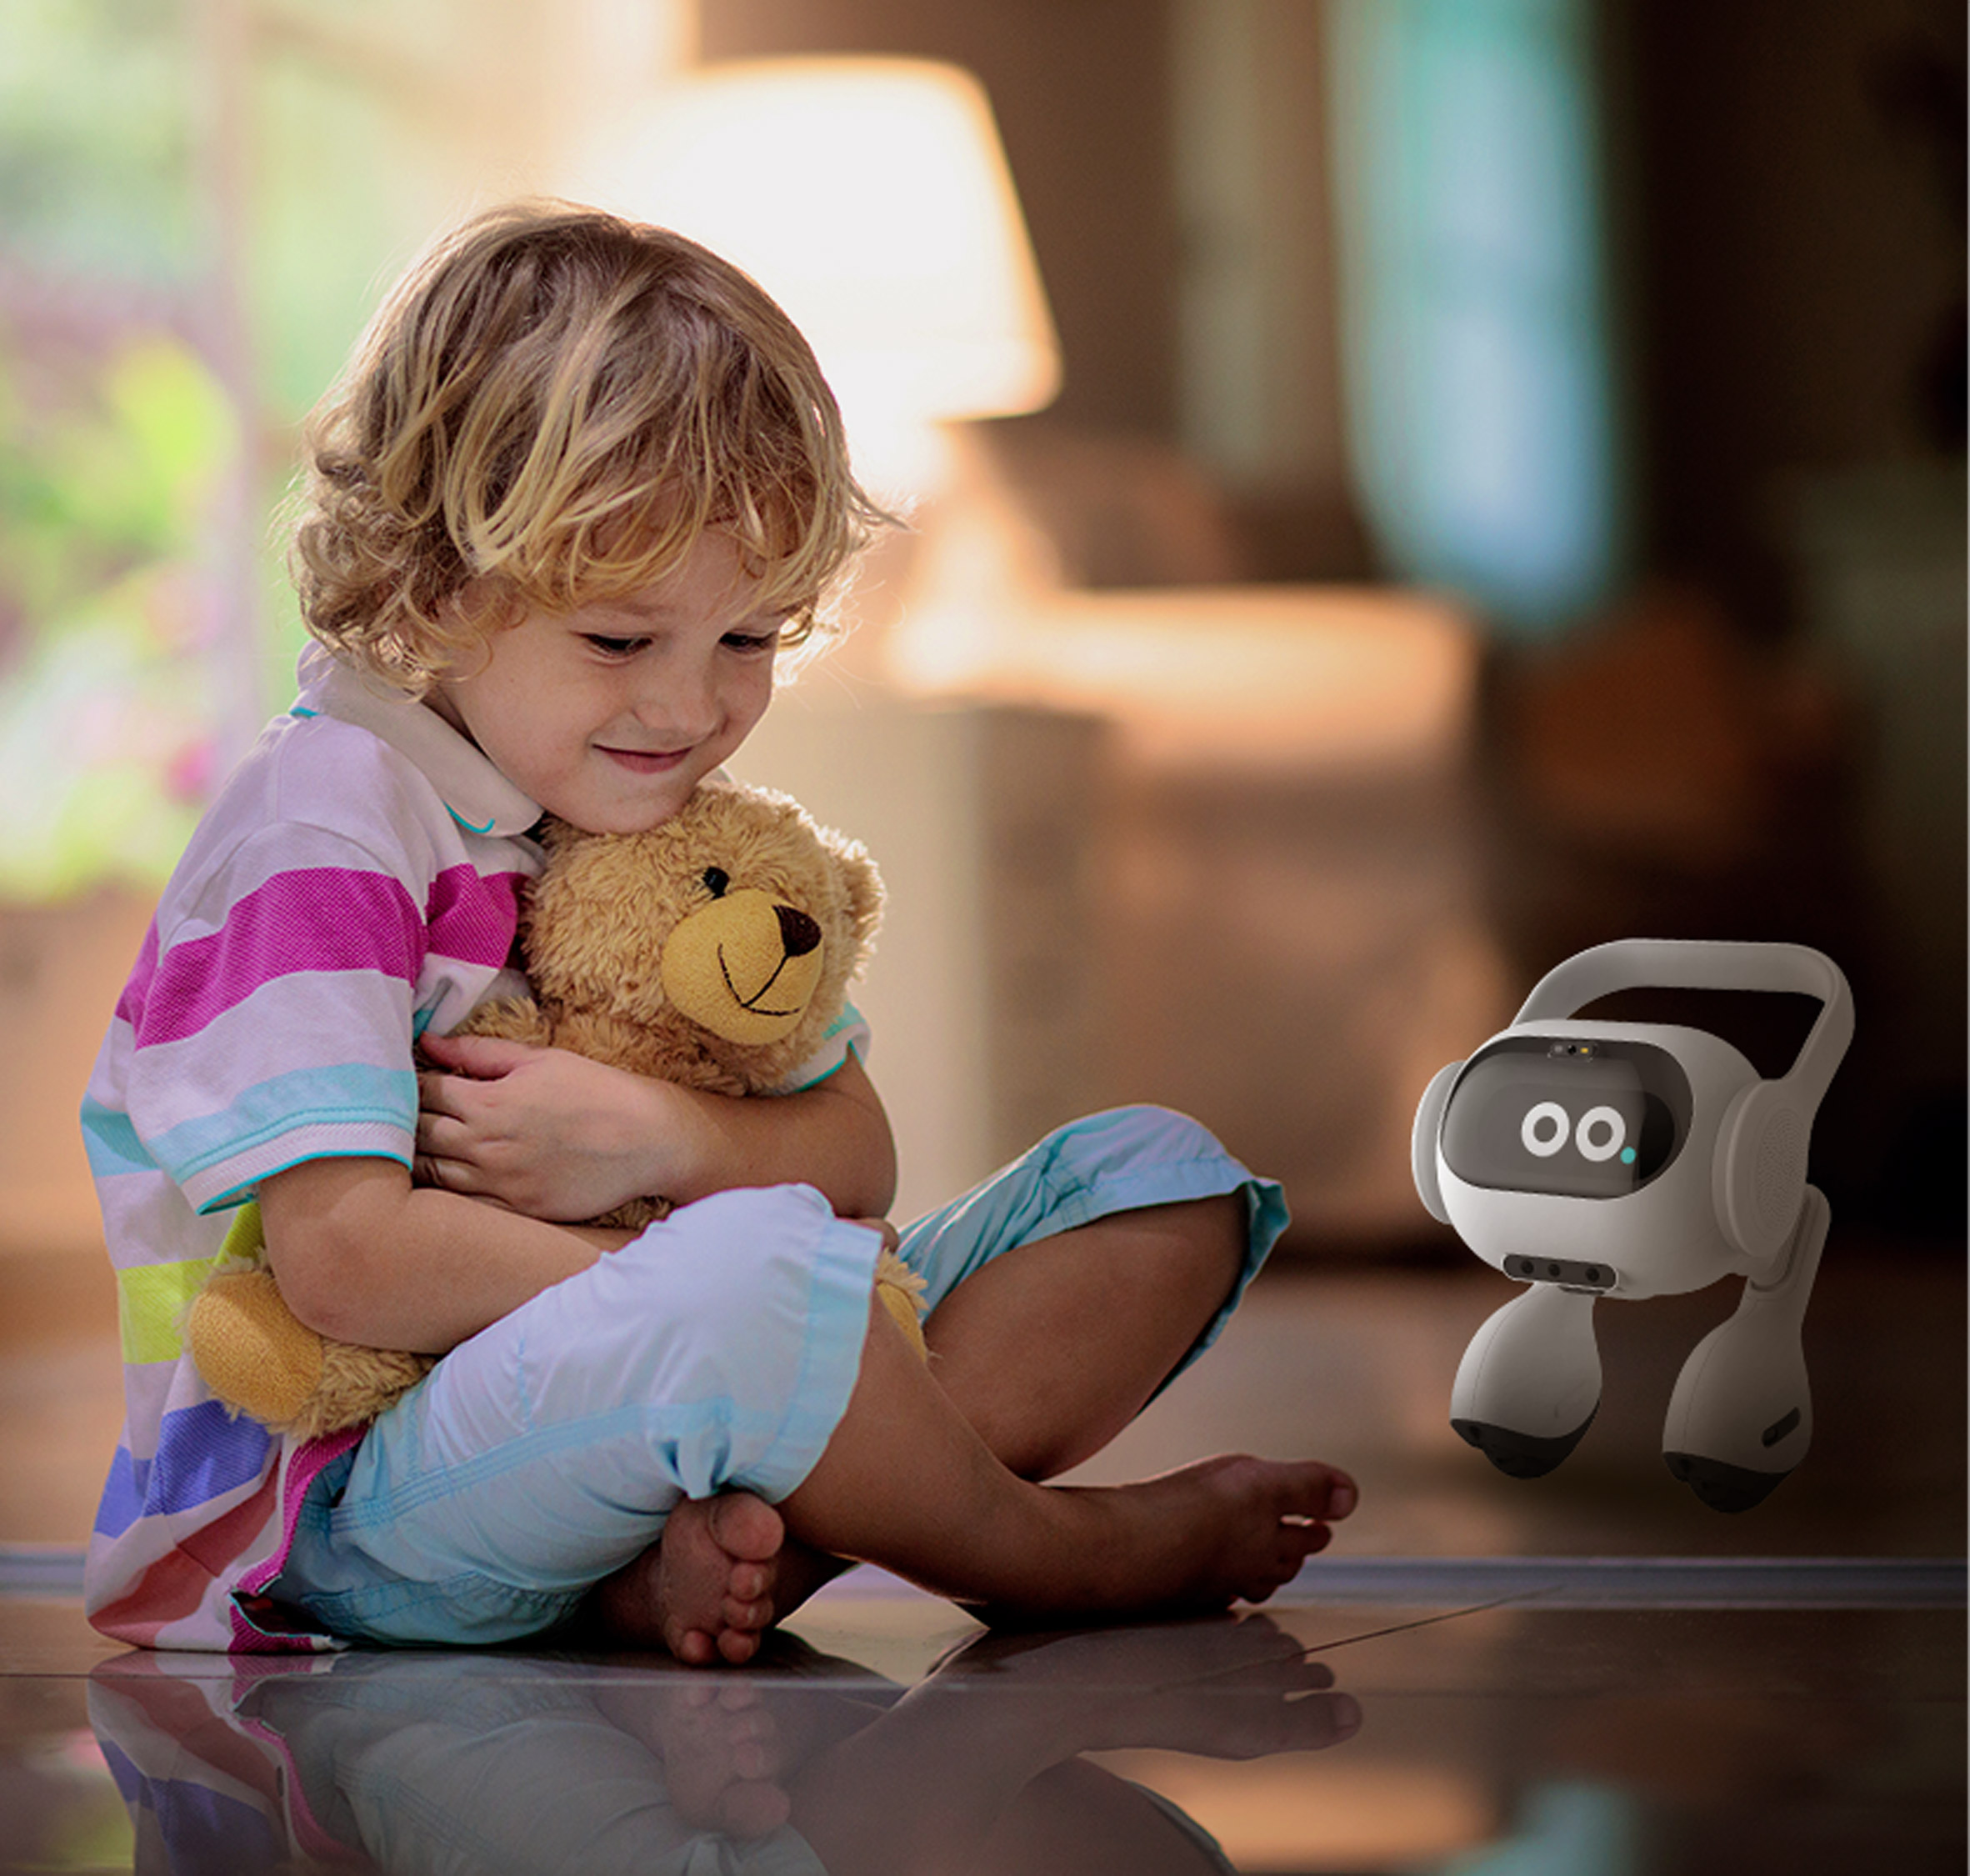 AI-powered robot watching over an unattended child